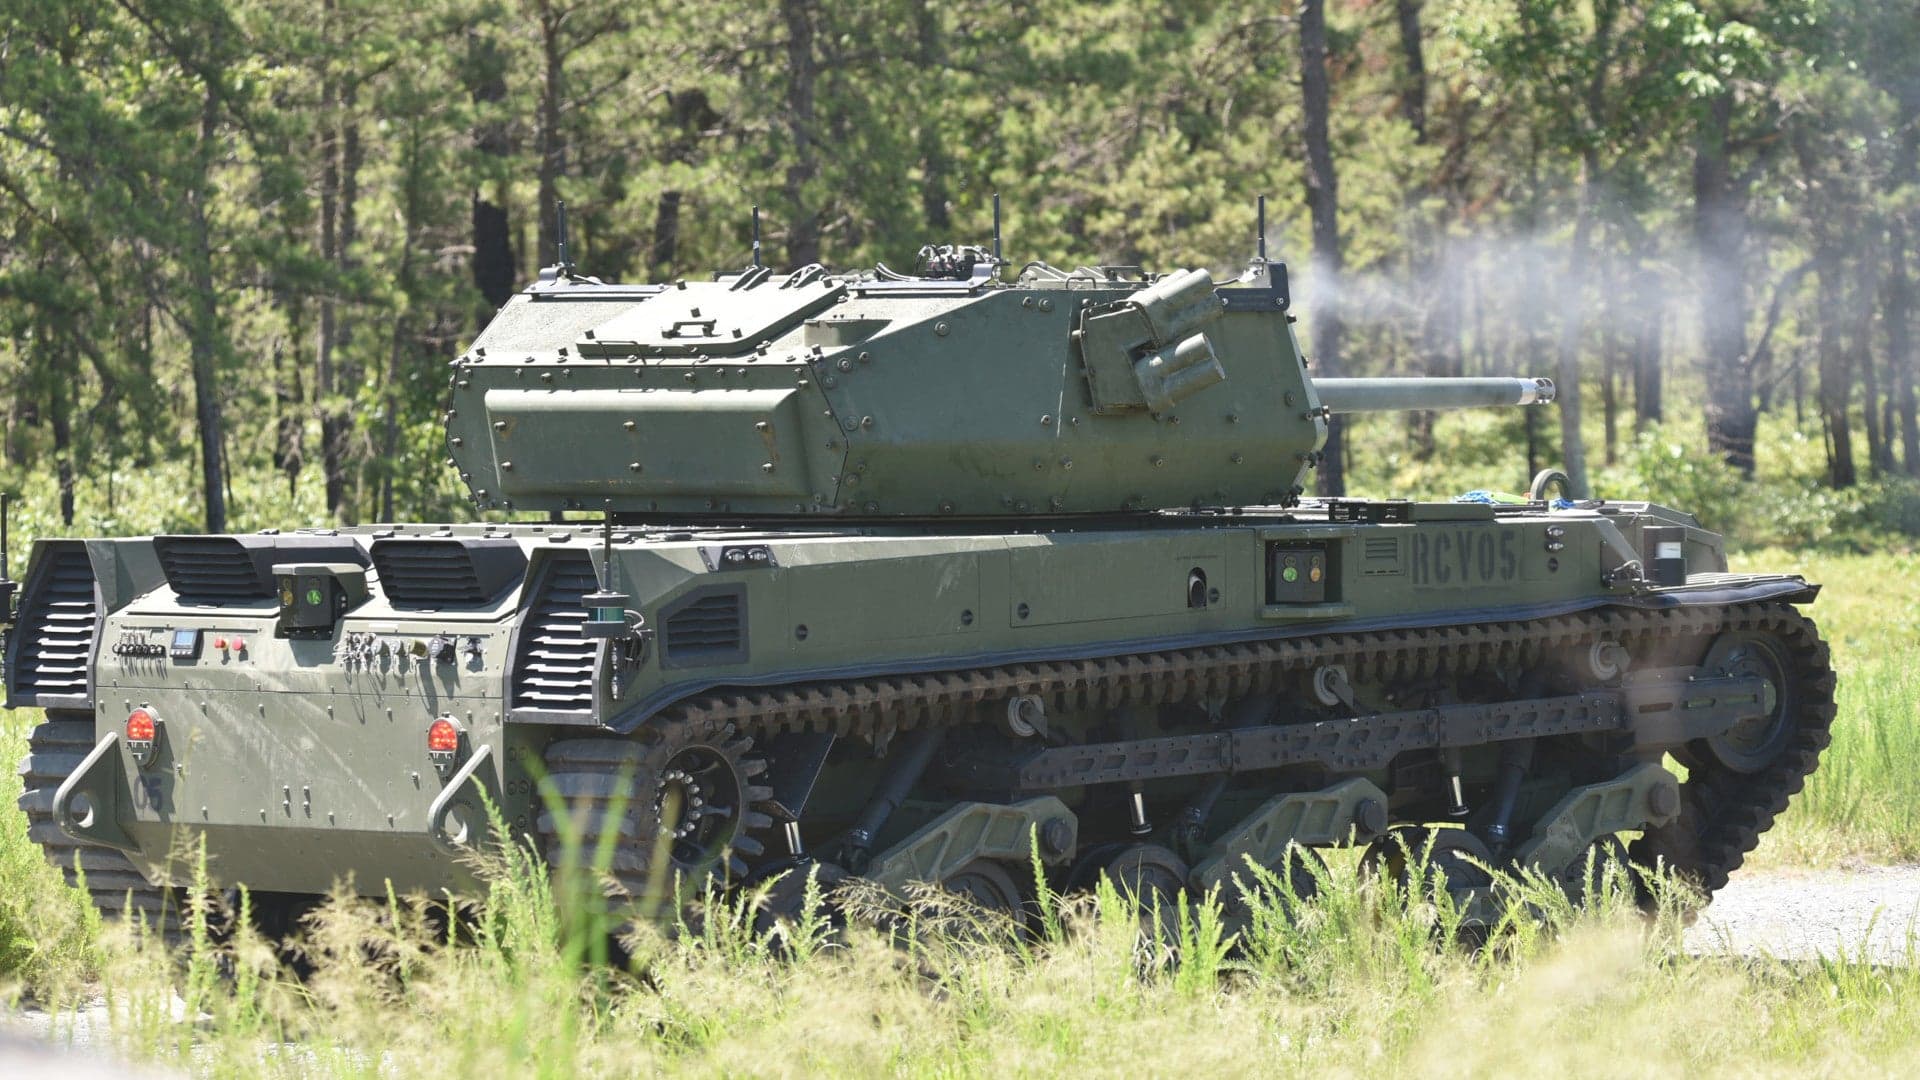 Ripsaw Unmanned Mini-Tank Sent To The Army’s Shooting Range For The First Time